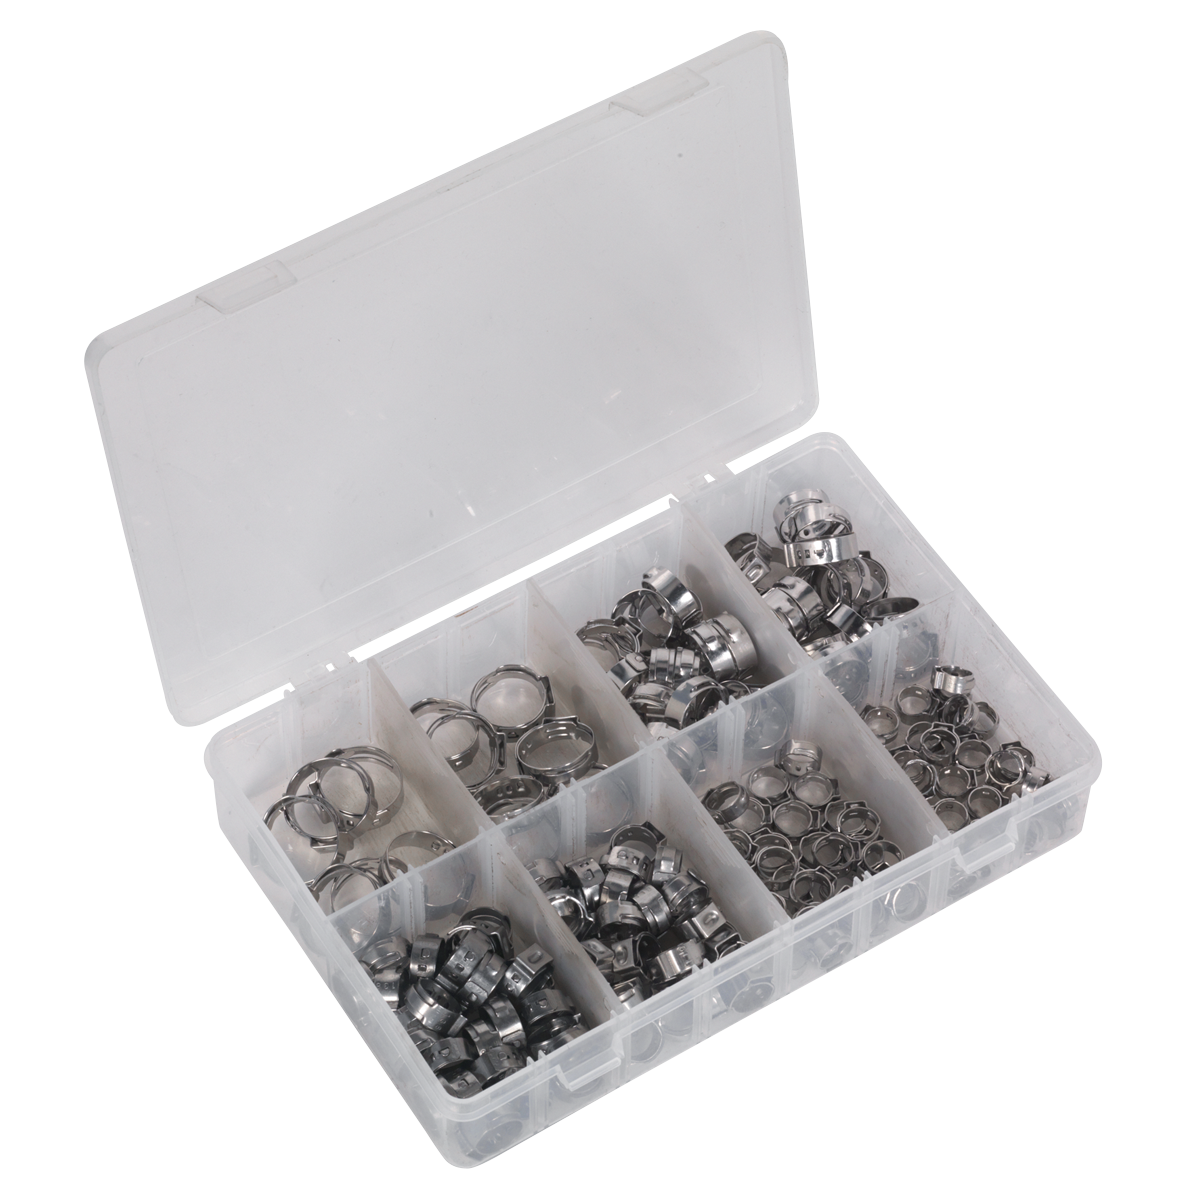 O-Clip Single Ear Assortment 160pc Stainless Steel - AB043SE - Farming Parts